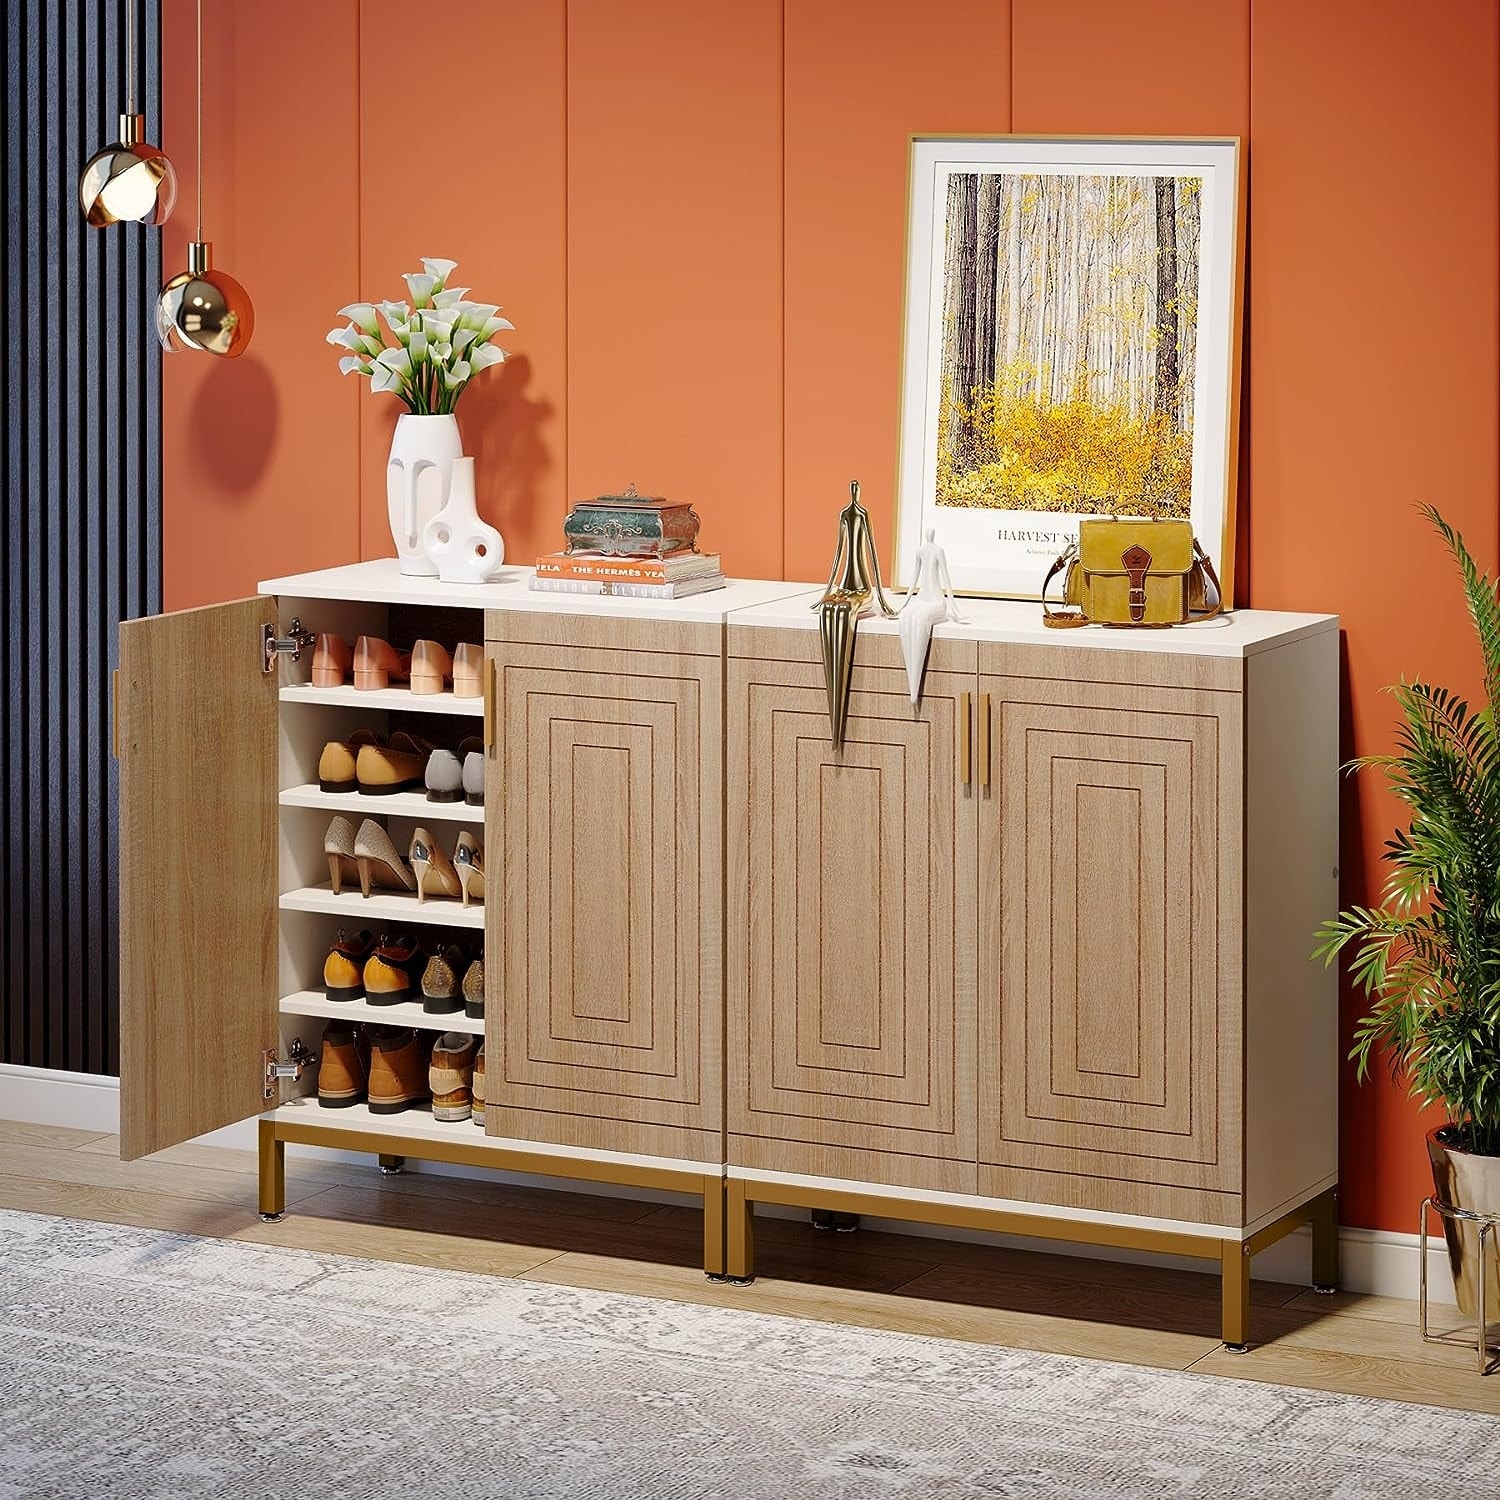 https://ak1.ostkcdn.com/images/products/is/images/direct/f436b45a0bba6f4ff400e8448a9caaf8df3571e1/20-Pairs-Shoe-Storage-Cabinet-for-Entryway%2C-Freestanding-Shoe-Rack-Organizer.jpg